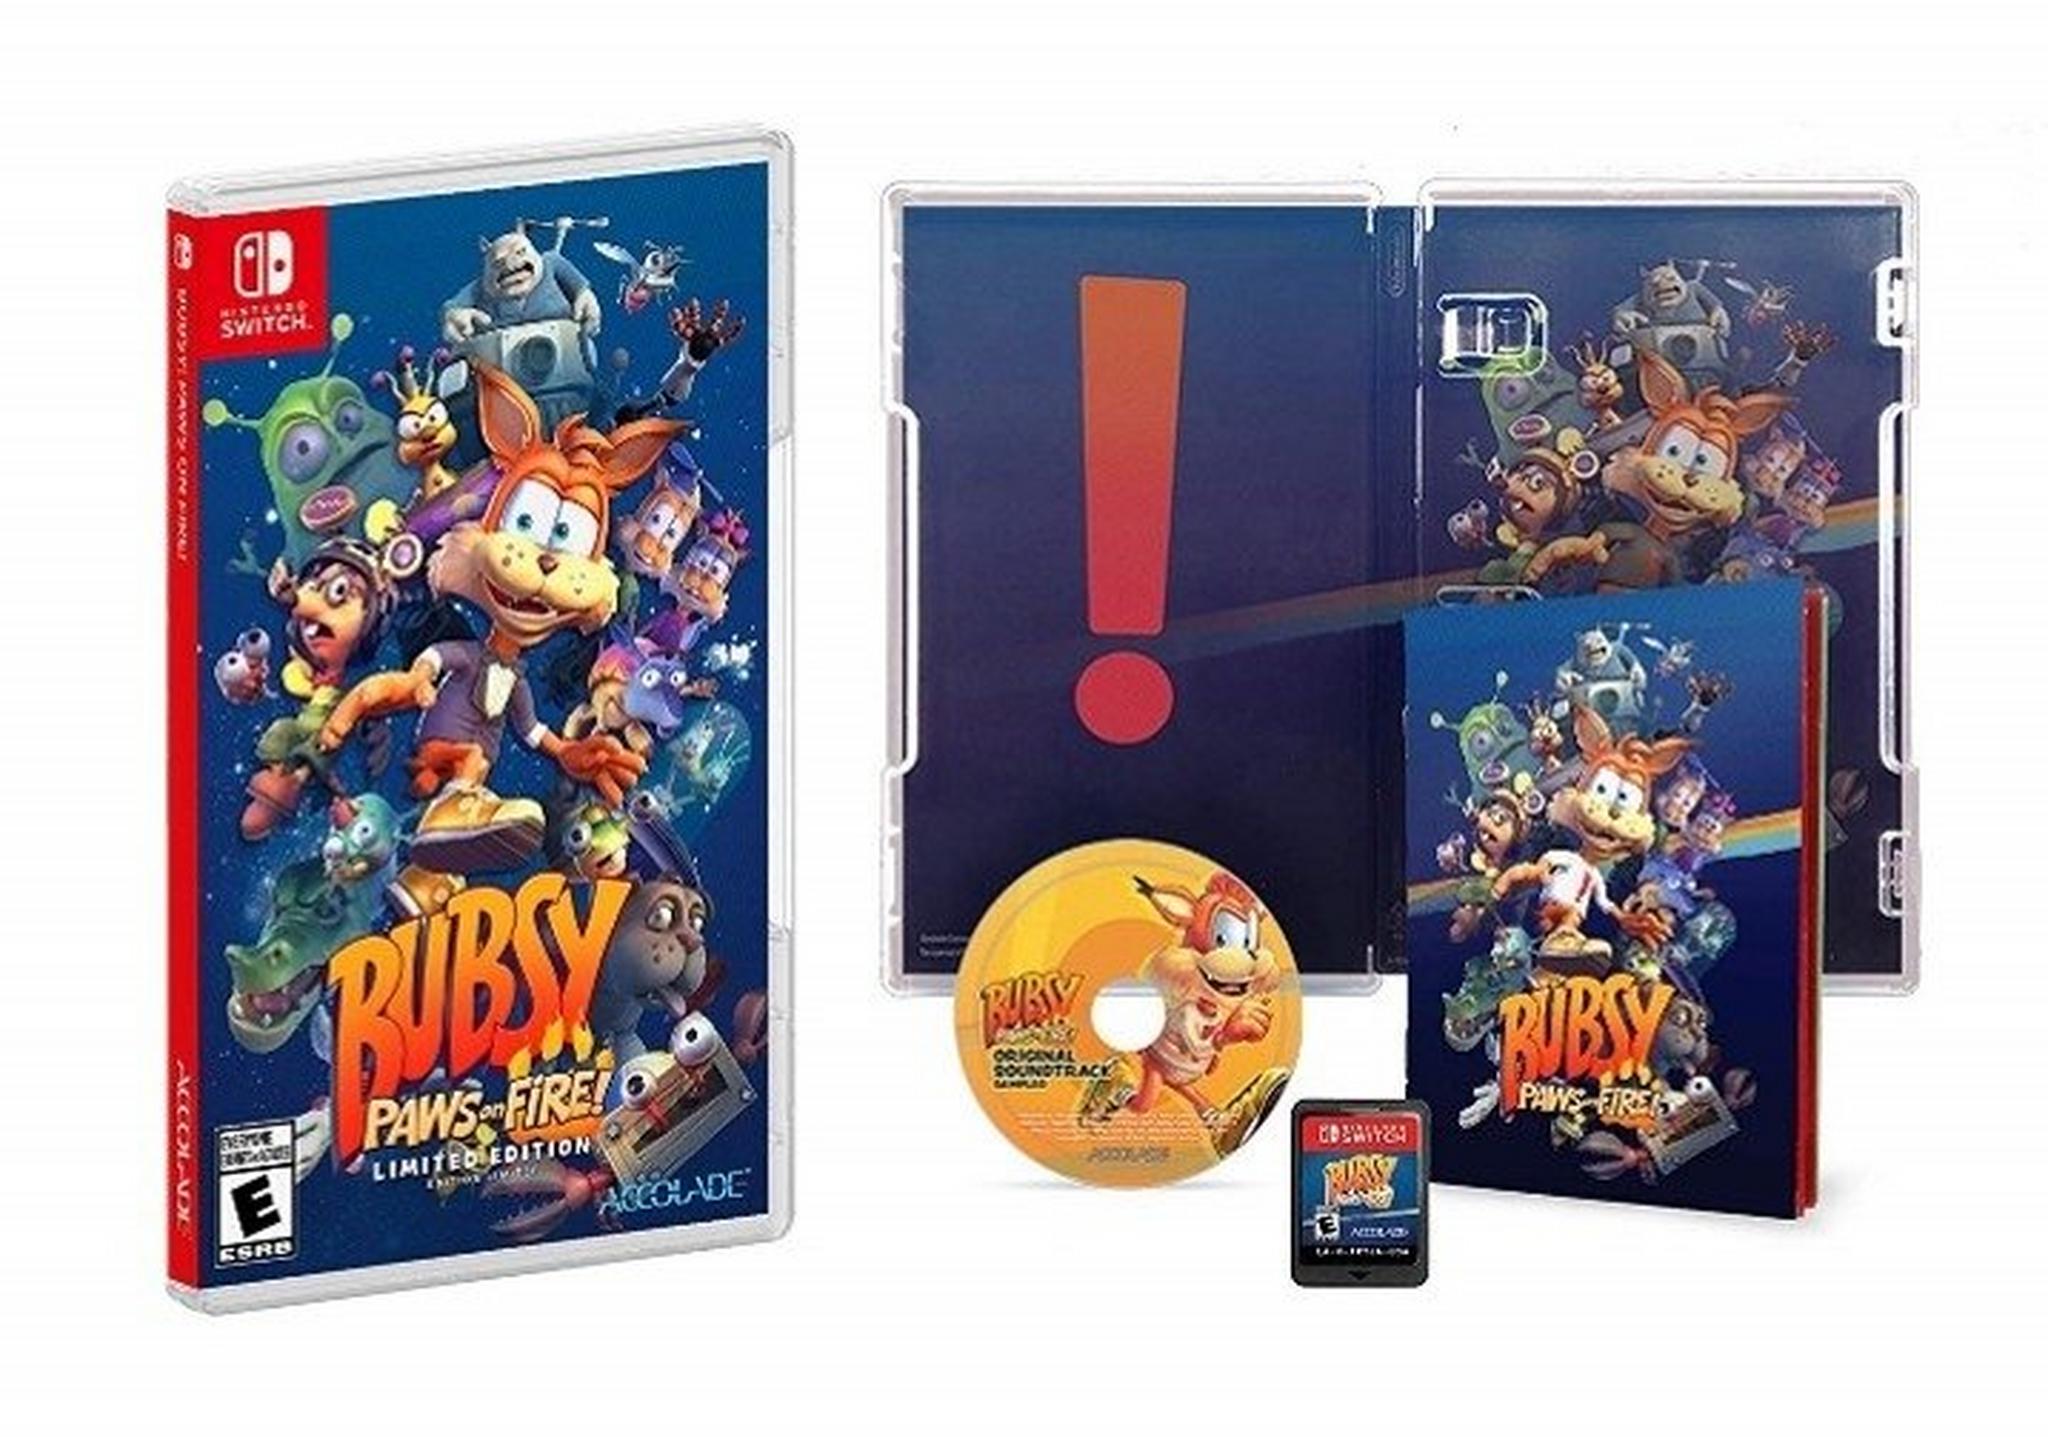 Bubsy Paws on Fire! Limited Edition - Nintendo Switch Game